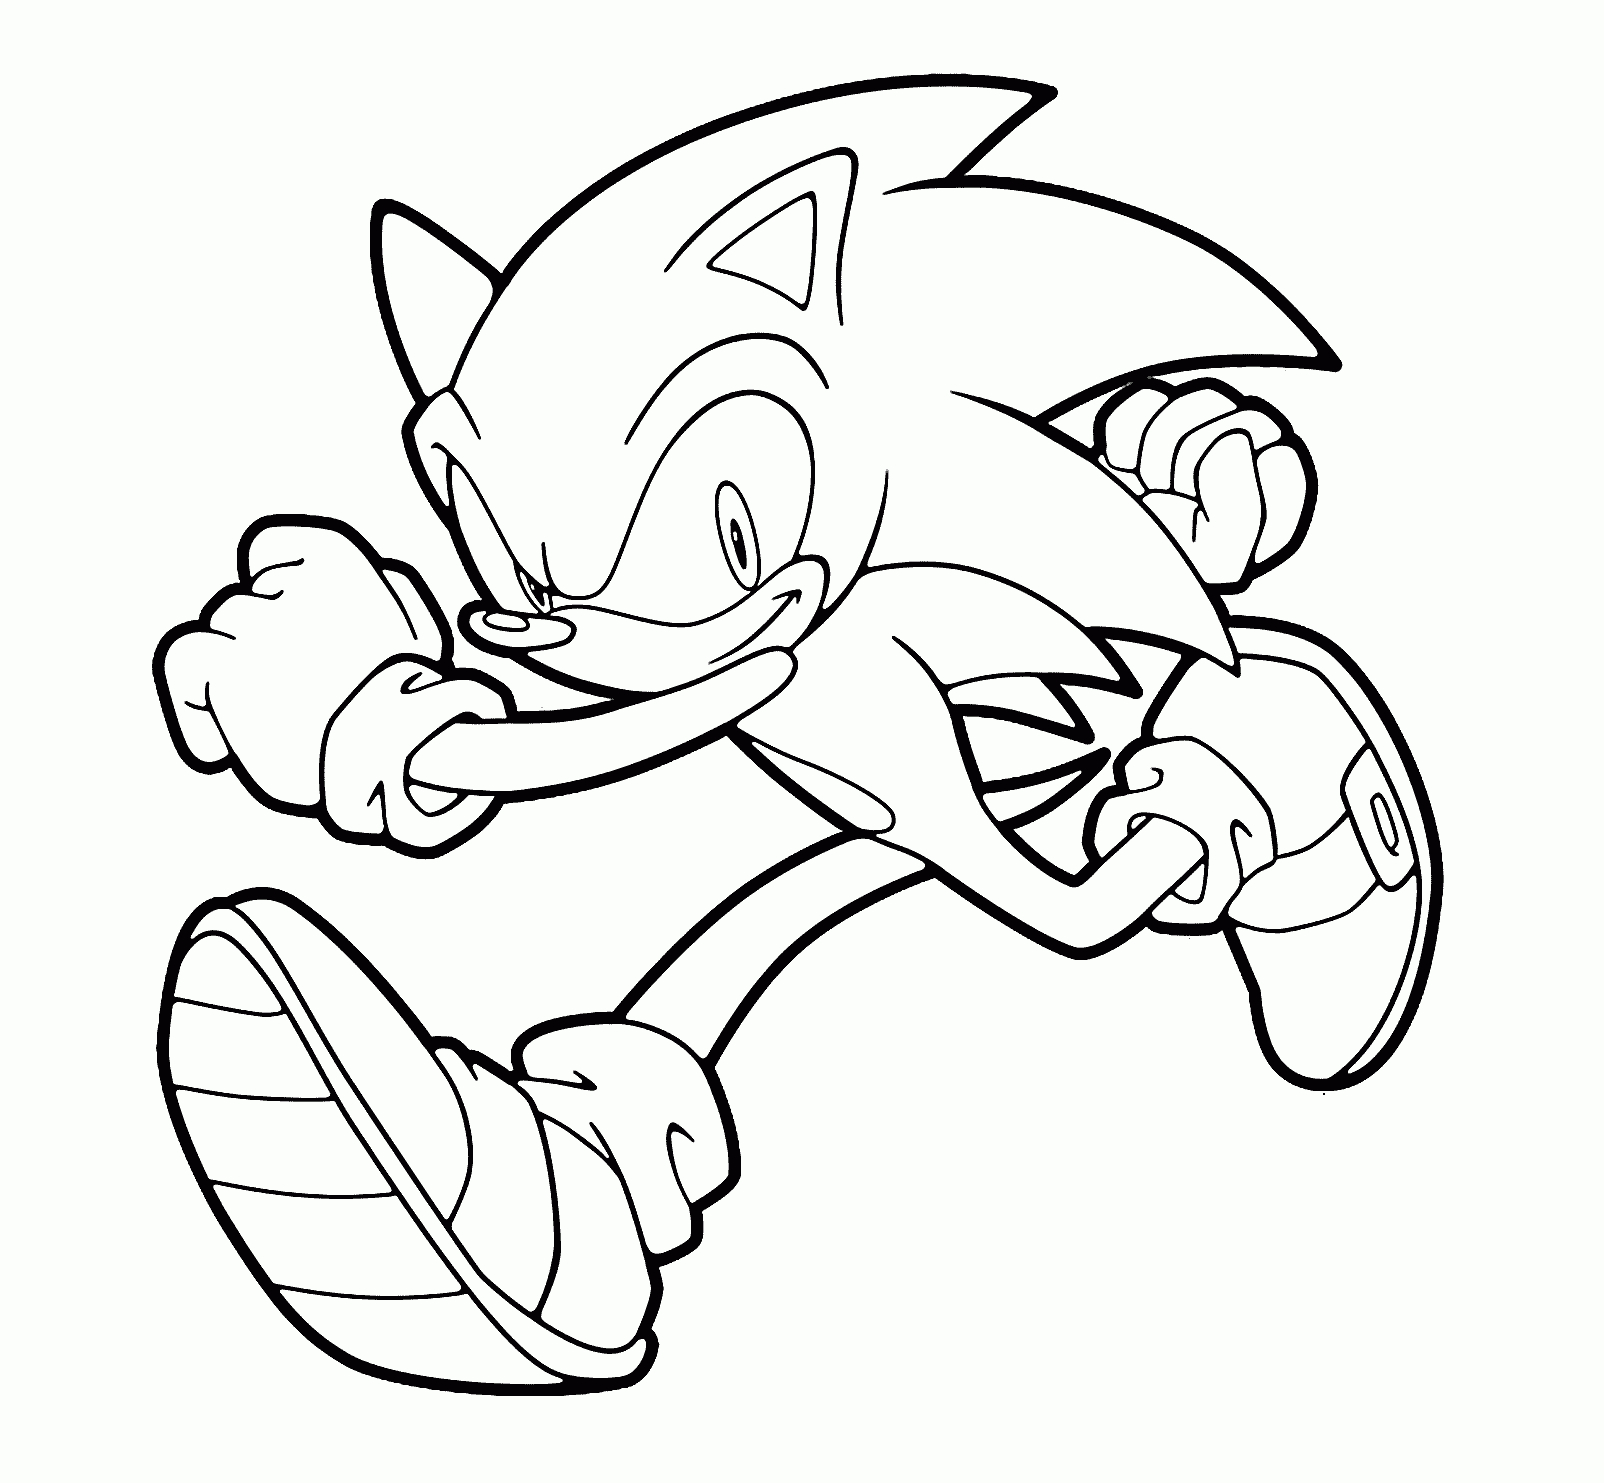 Sonic Coloring Pages Online For Free - Coloring Home - Sonic Coloring Pages Free Printable